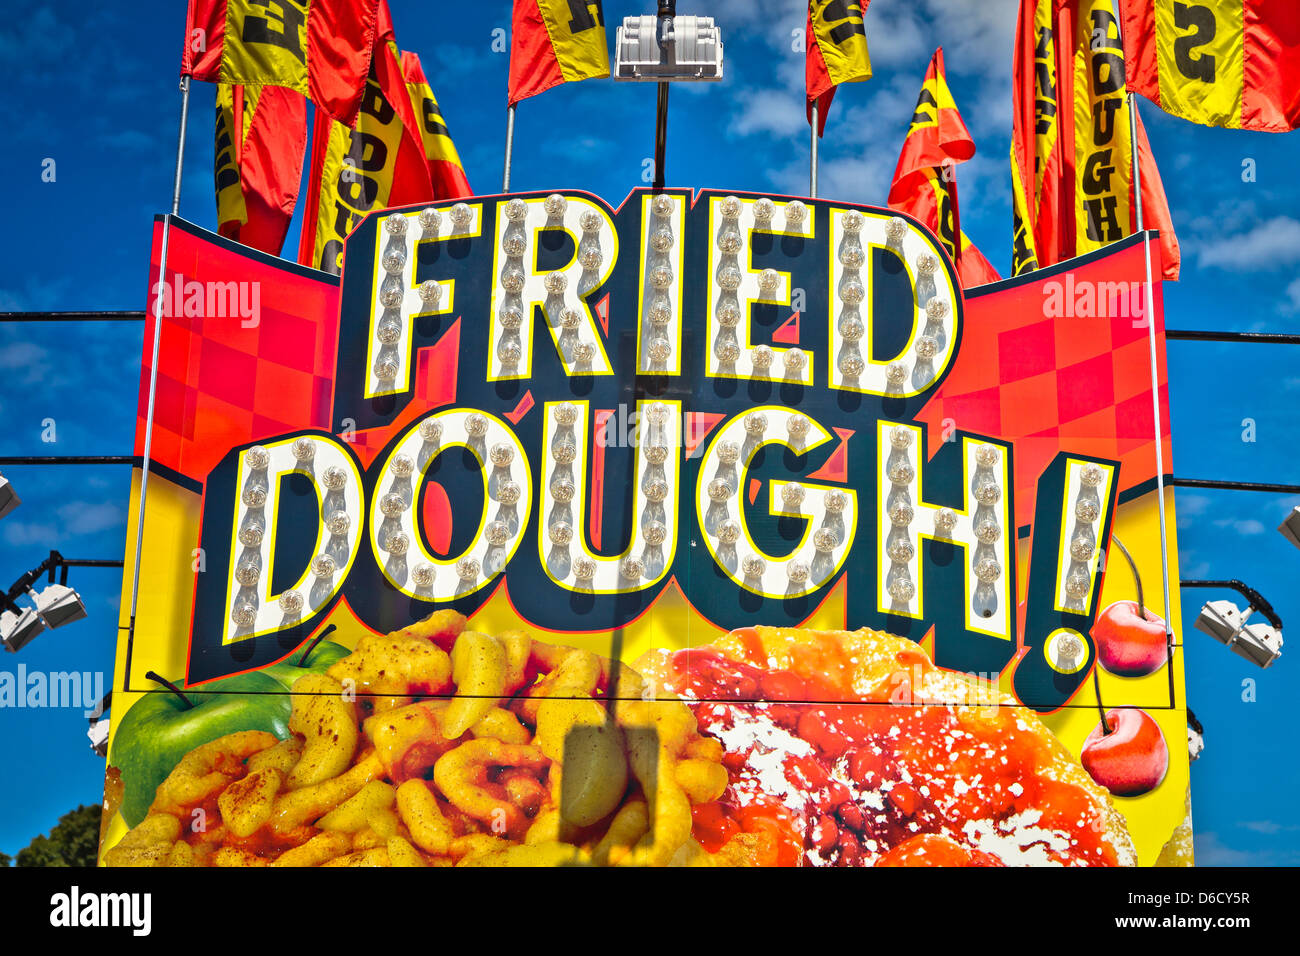 Fried Dough sign at a county fair Stock Photo